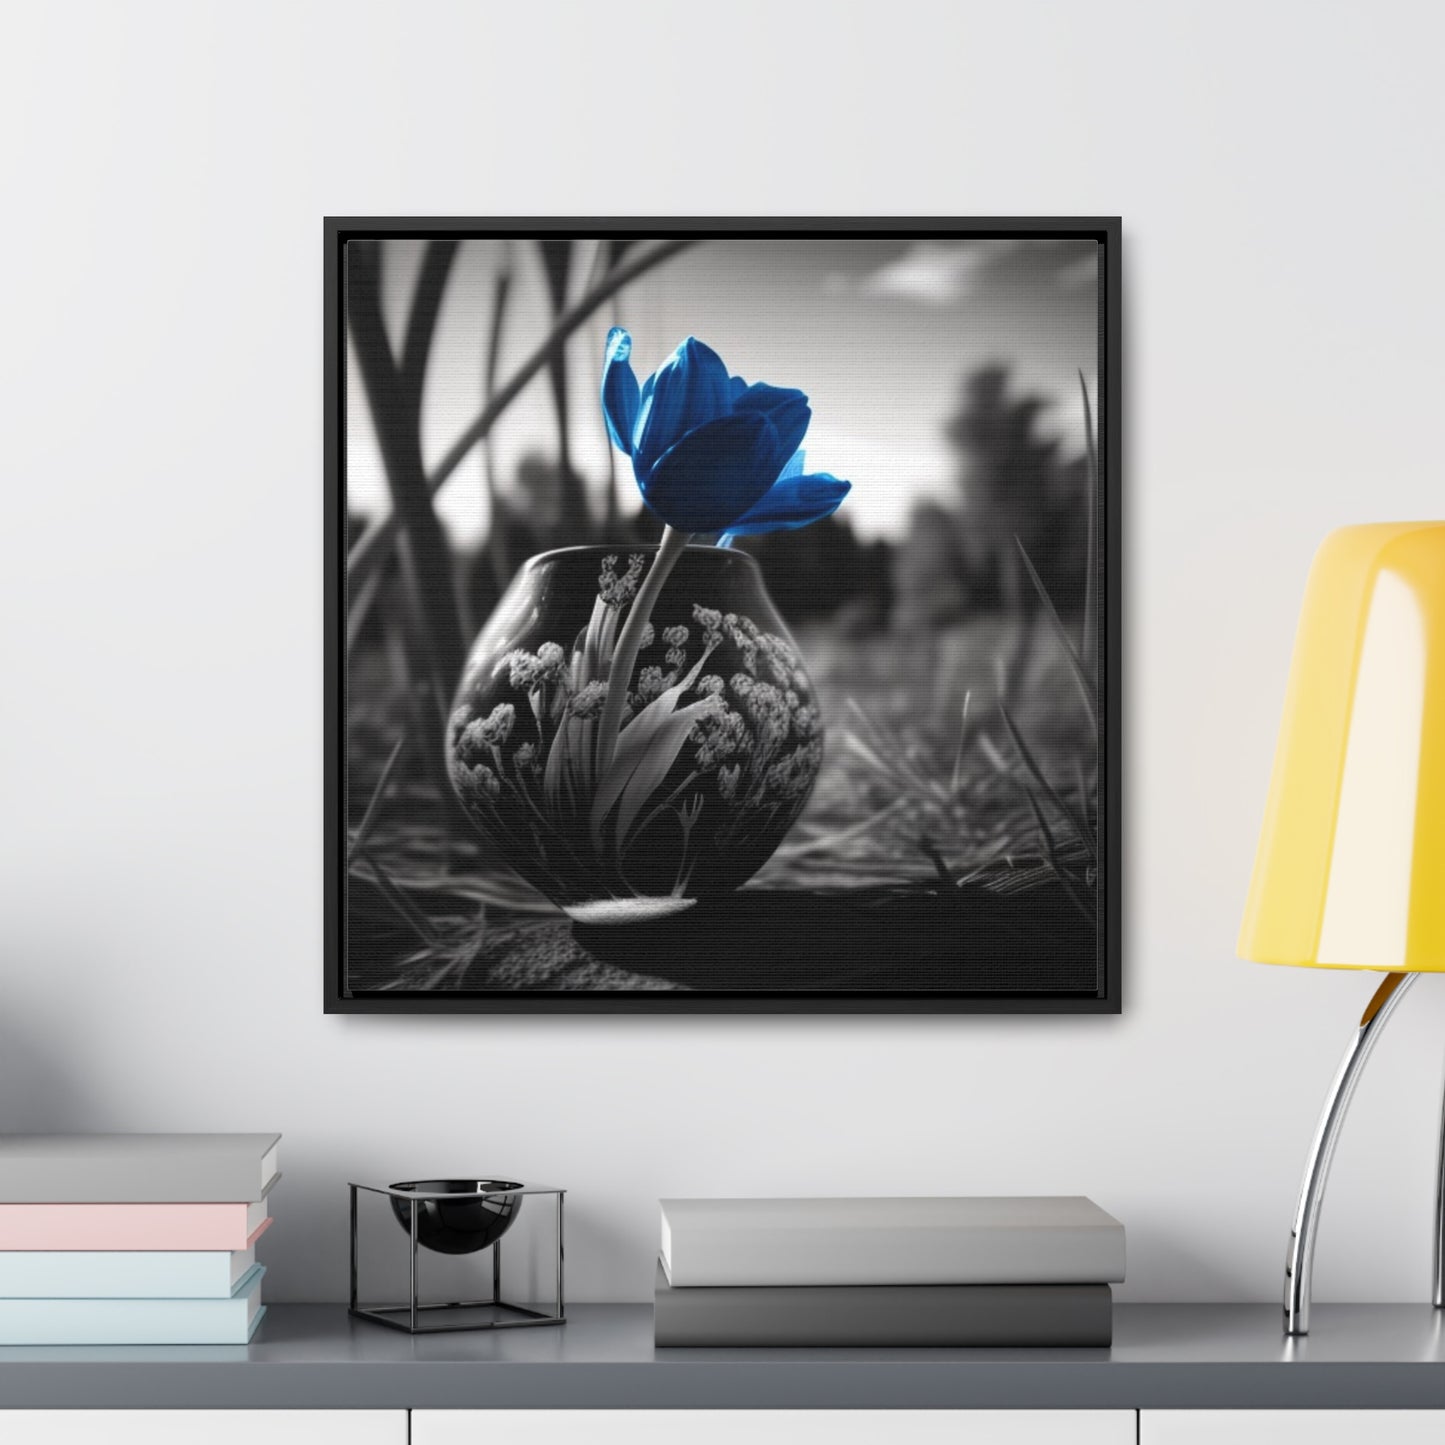 Gallery Canvas Wraps, Square Frame Tulip 3